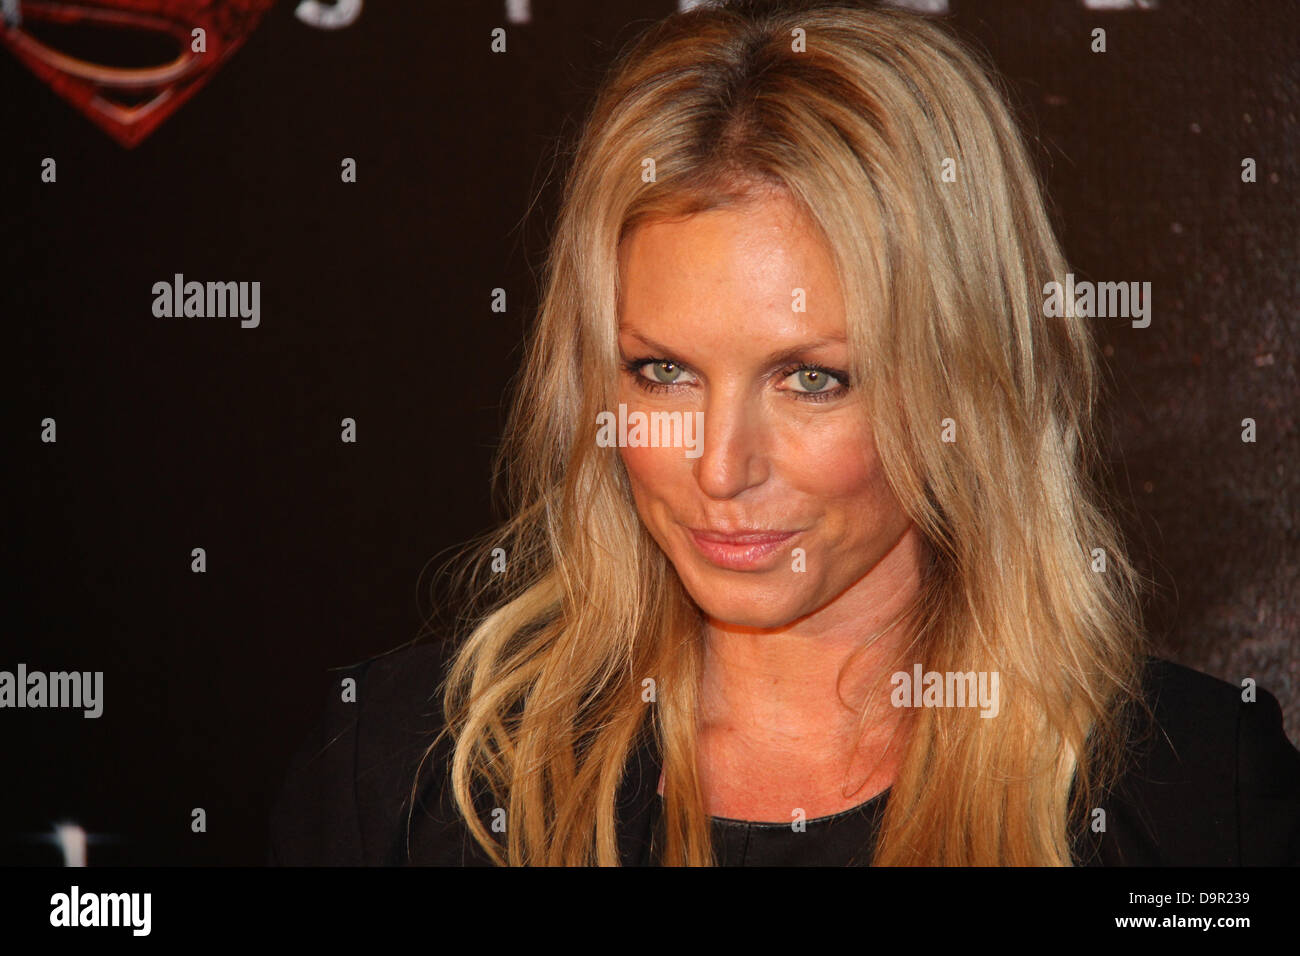 Event Cinemas, George Street, Sydney, NSW, Australia. 24 June 2013. Man Of Steel (3D) Australian Premiere at. A young itinerant worker is forced to confront his secret extraterrestrial heritage when members of his race invade earth. Pictured is Australian model, actress and TV presenter Annalise Braakensiek. Credit: Credit:  Richard Milnes / Alamy live News. Stock Photo